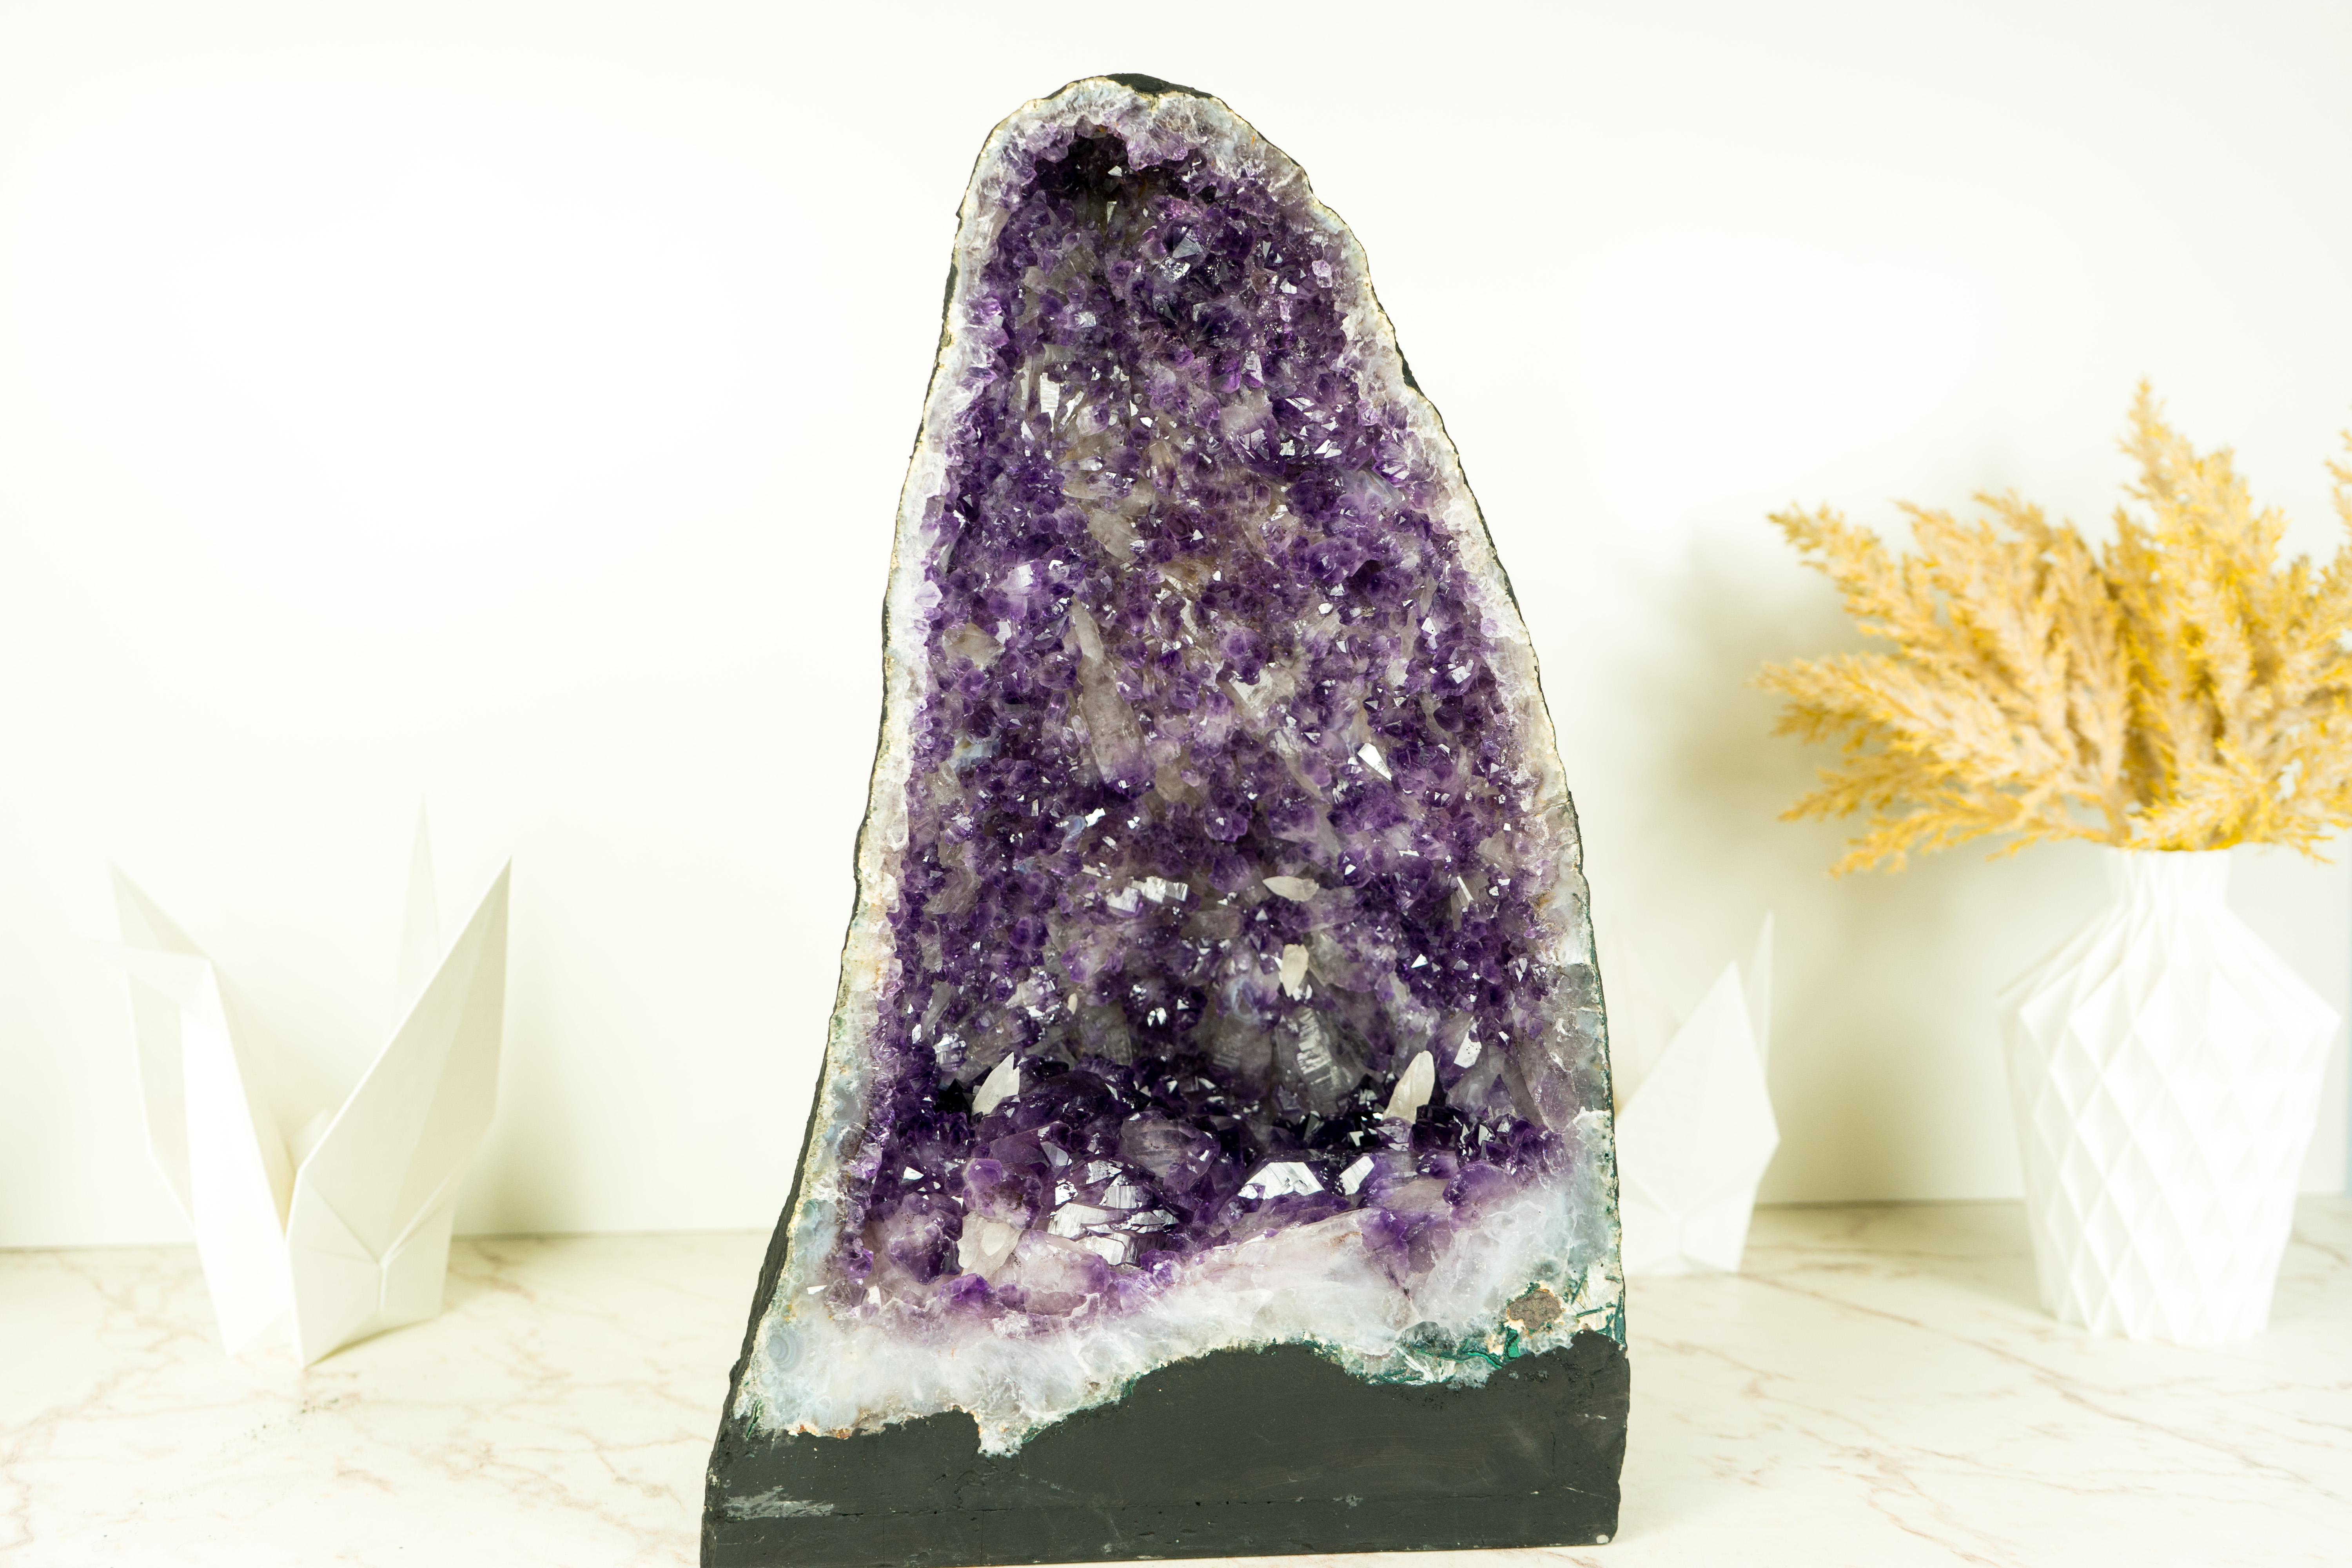 An Amethyst Geode that brings rarely seen dual-zoned purple Amethyst druzy, gorgeous aesthetics, and rare calcite inclusions, this is a piece of natural artistry. This geode is a centerpiece that will elevate your home or office decor to another